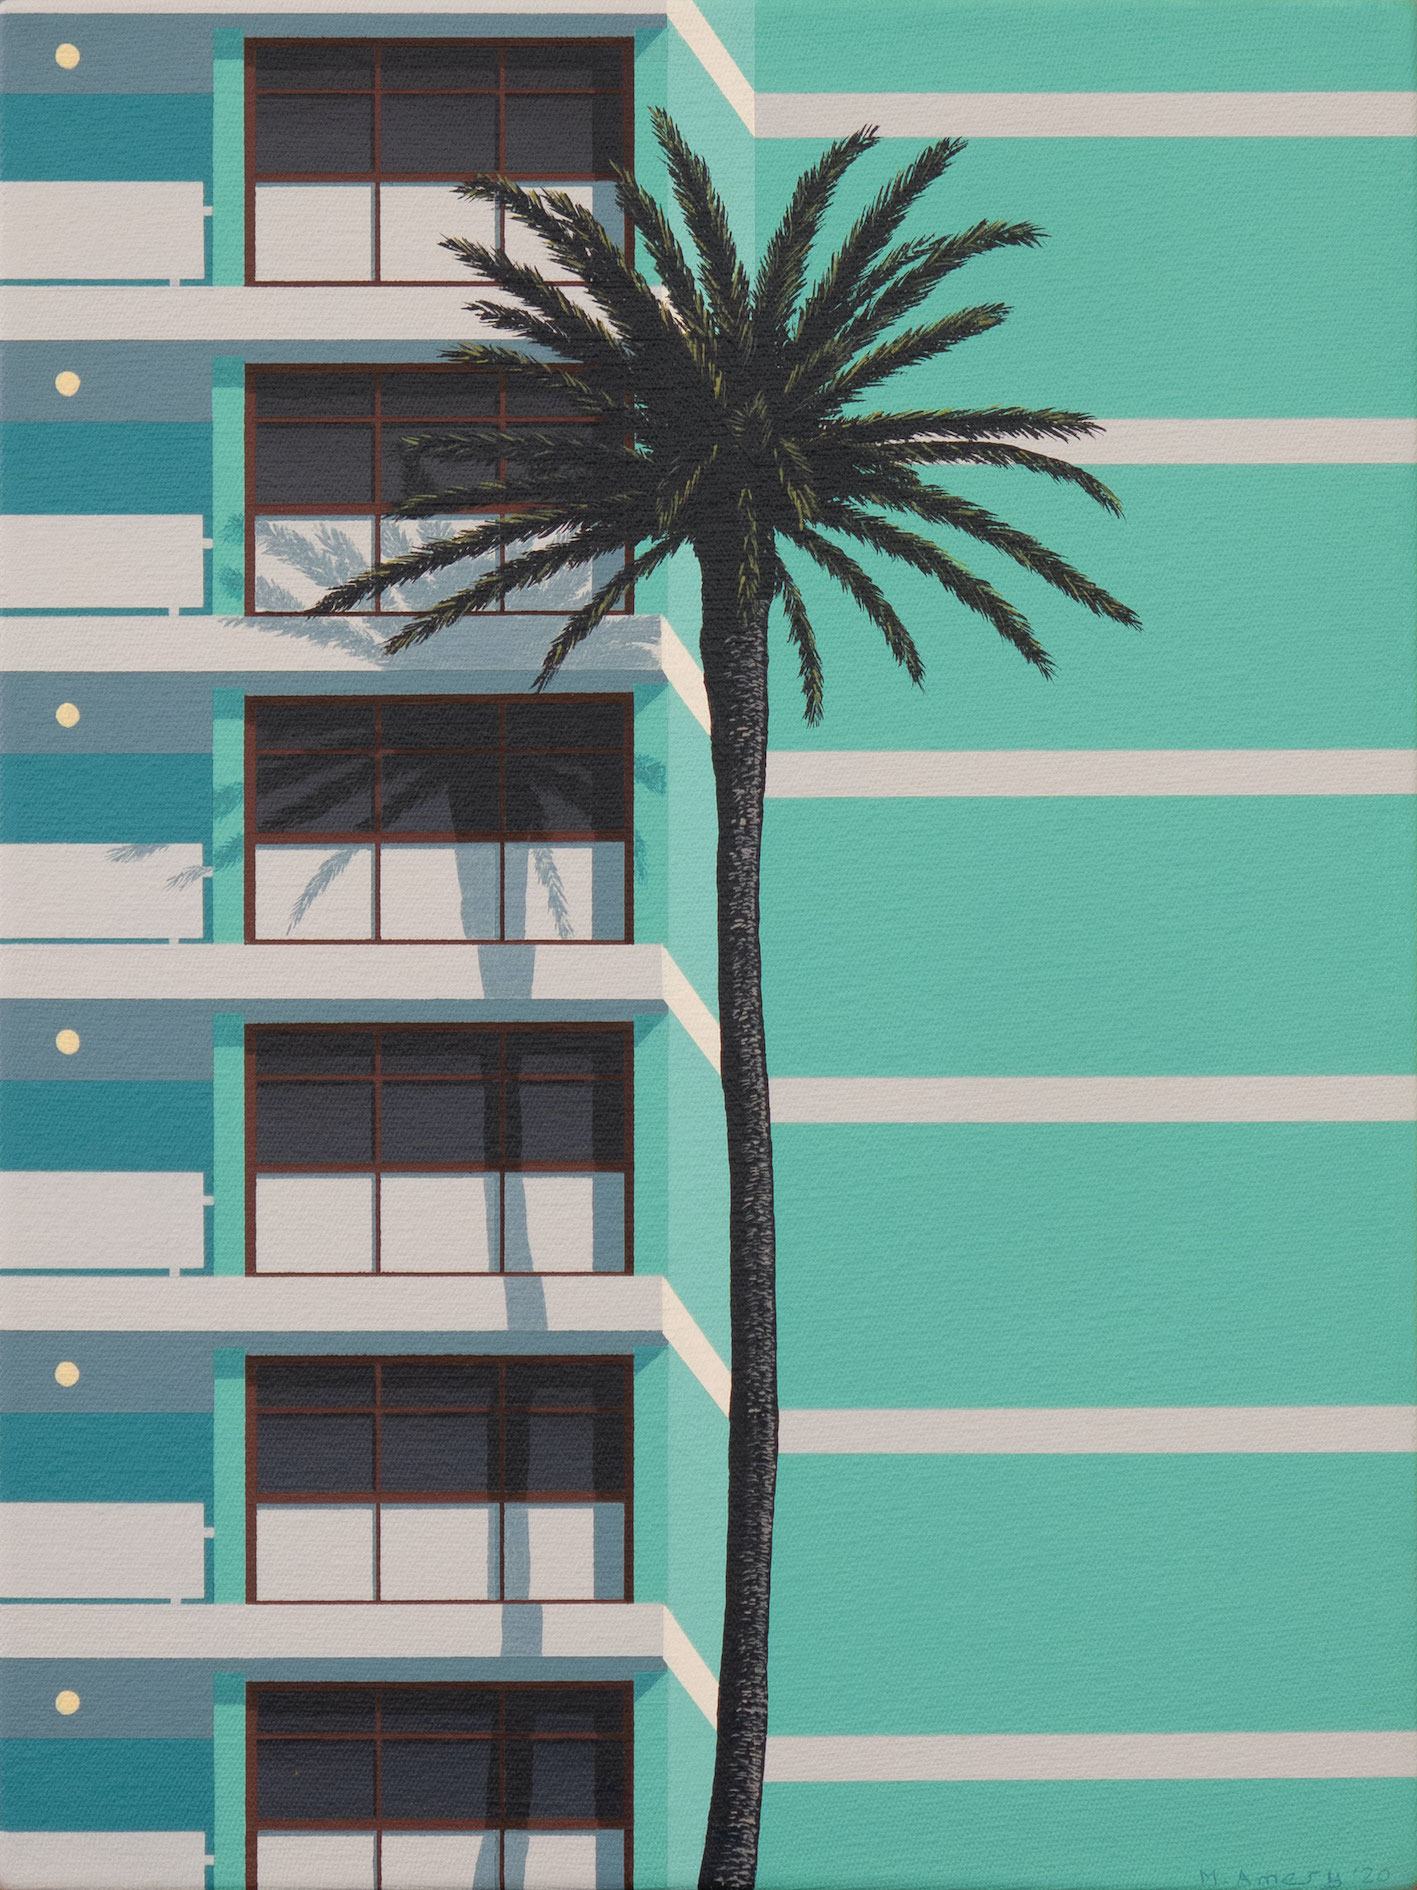 Michael Amery, City Trees 11, 2020, Acrylic on canvas. Signed bottom right. Size: 40 x 30 cm. Price: R7,000. Presented by 131 A Gallery. ENQUIRE